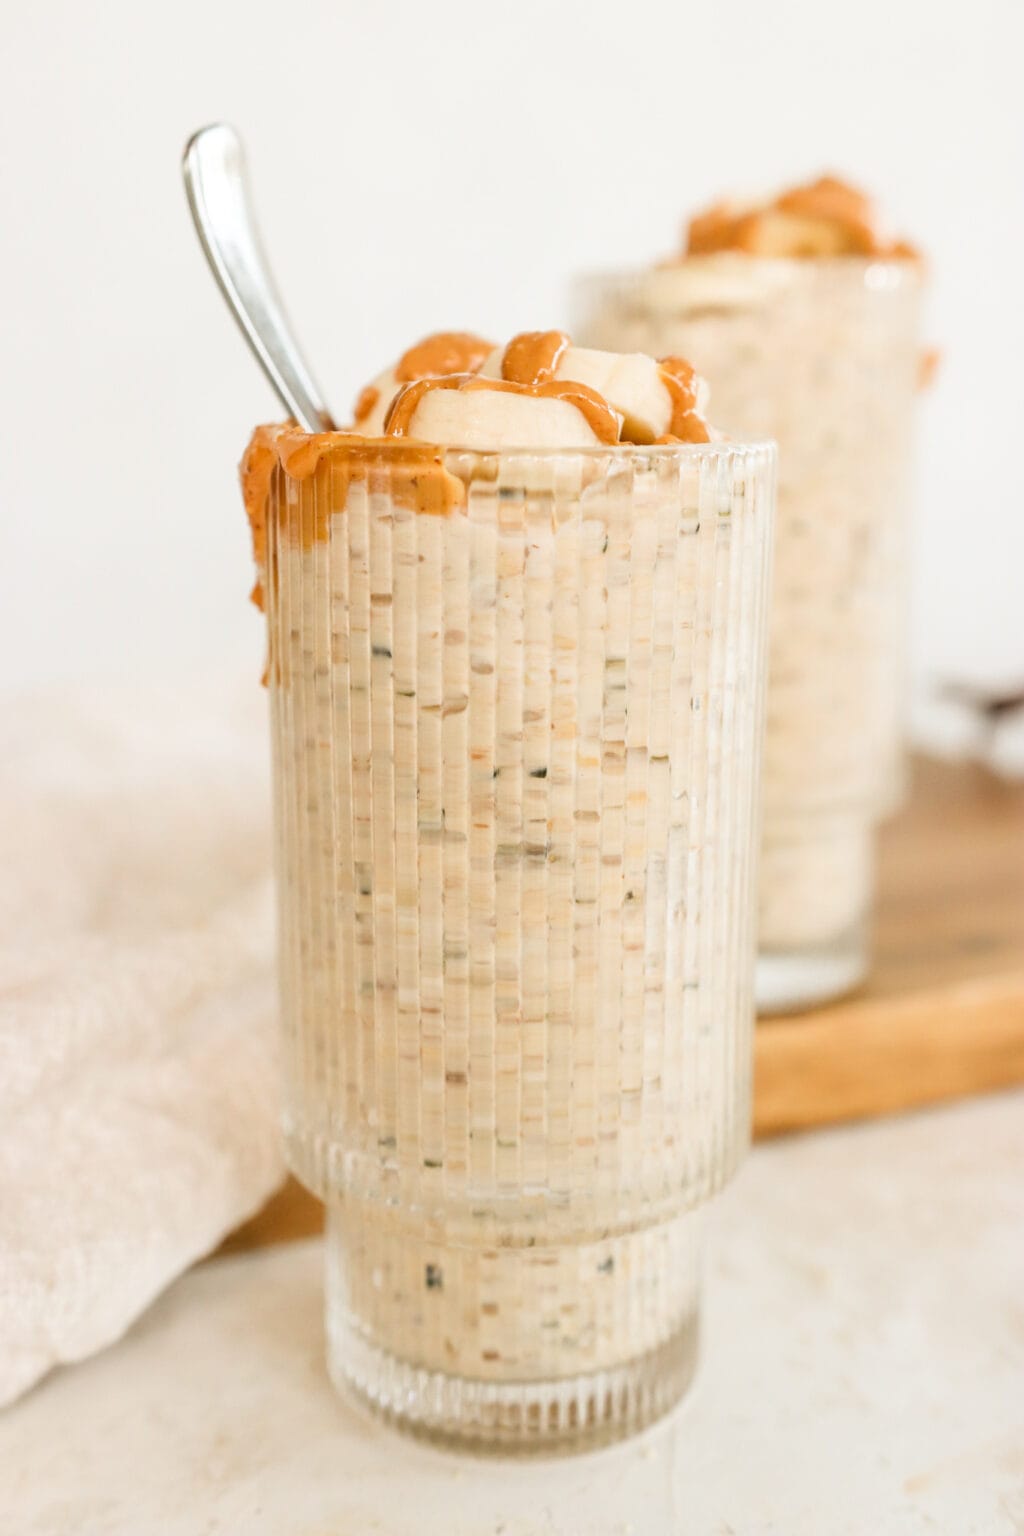 Peanut Butter & Banana Kefir Overnight Oats in two glass cups on a wood cutting board